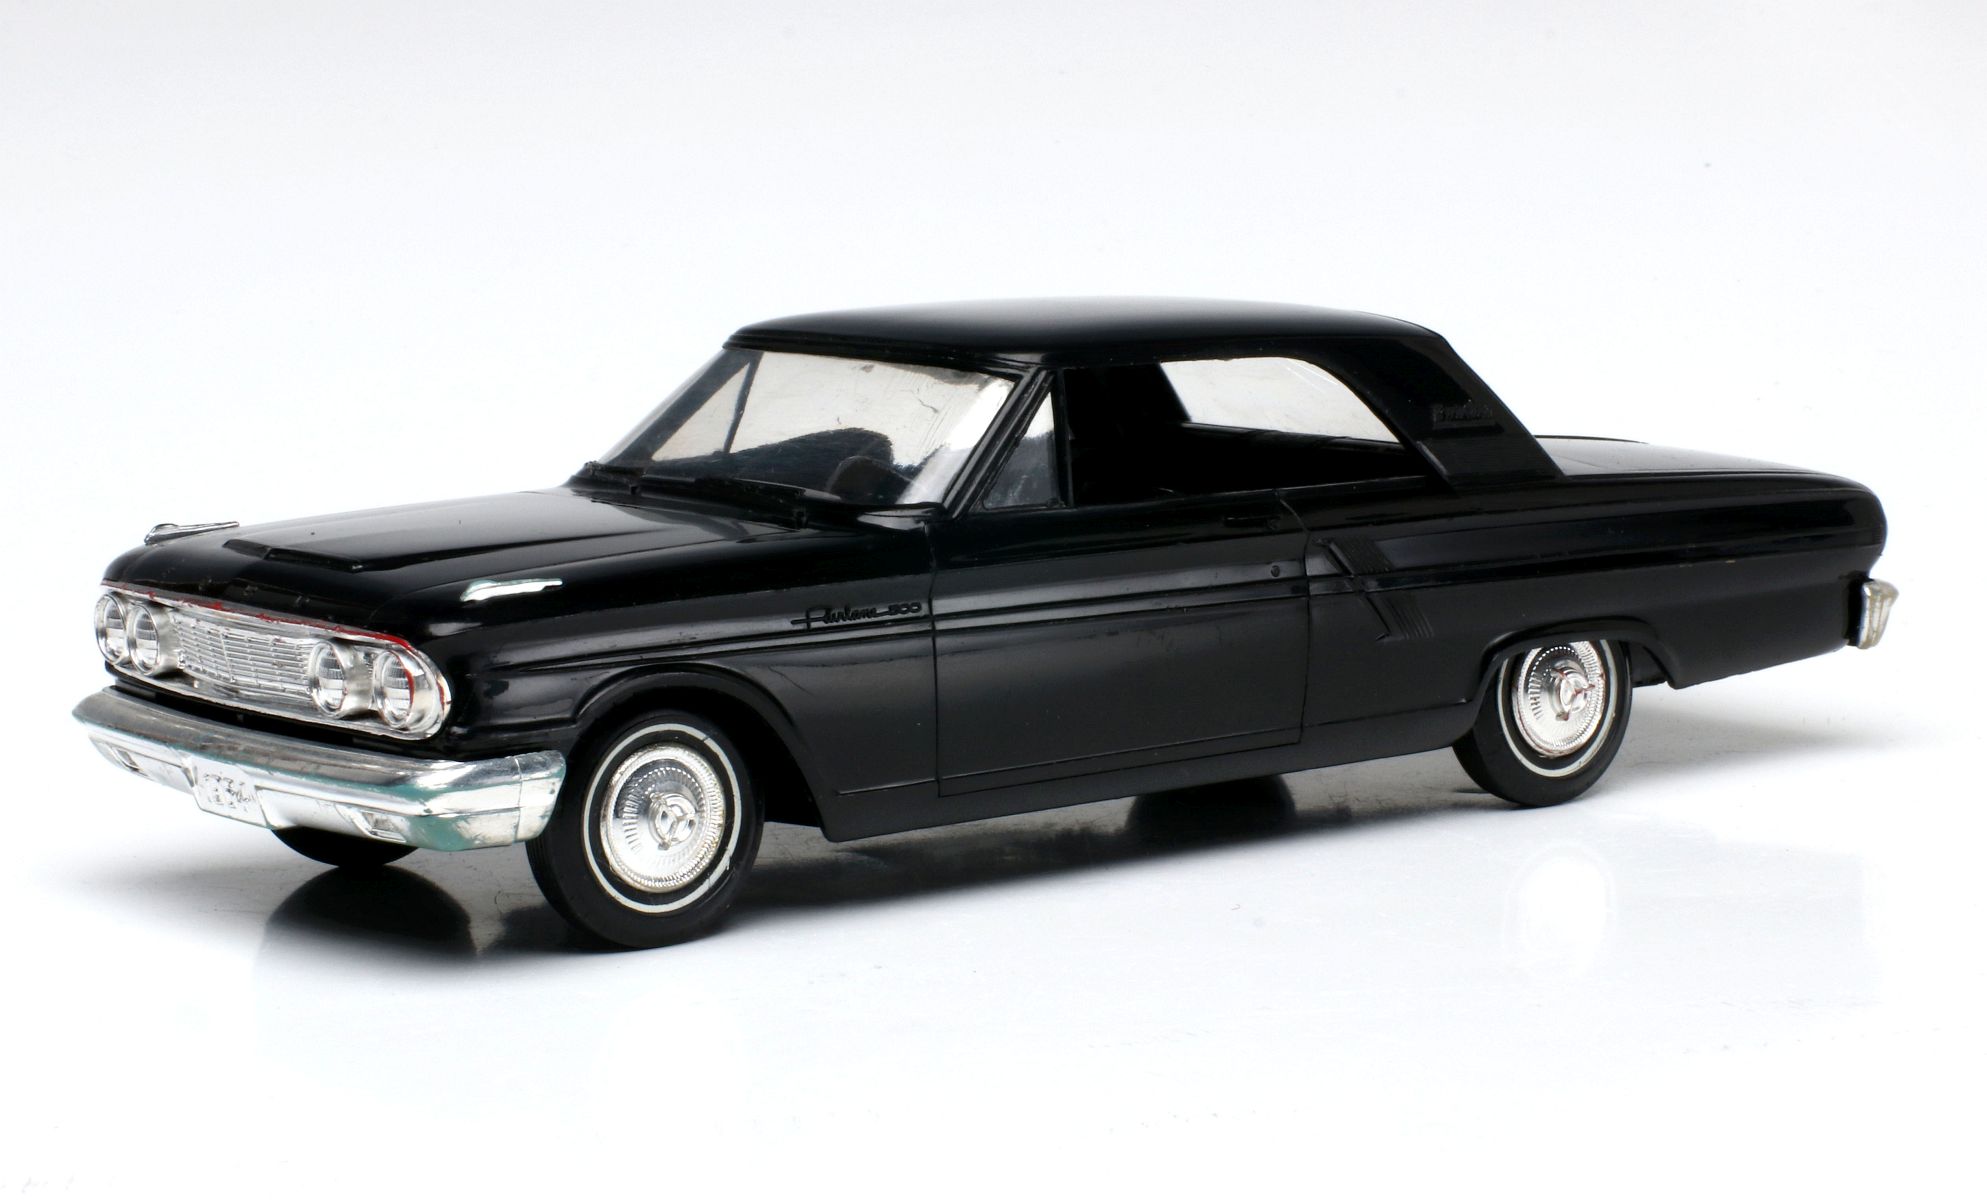 A DEALER'S PROMOTIONAL MODEL OF 1964 FORD FAIRLANE